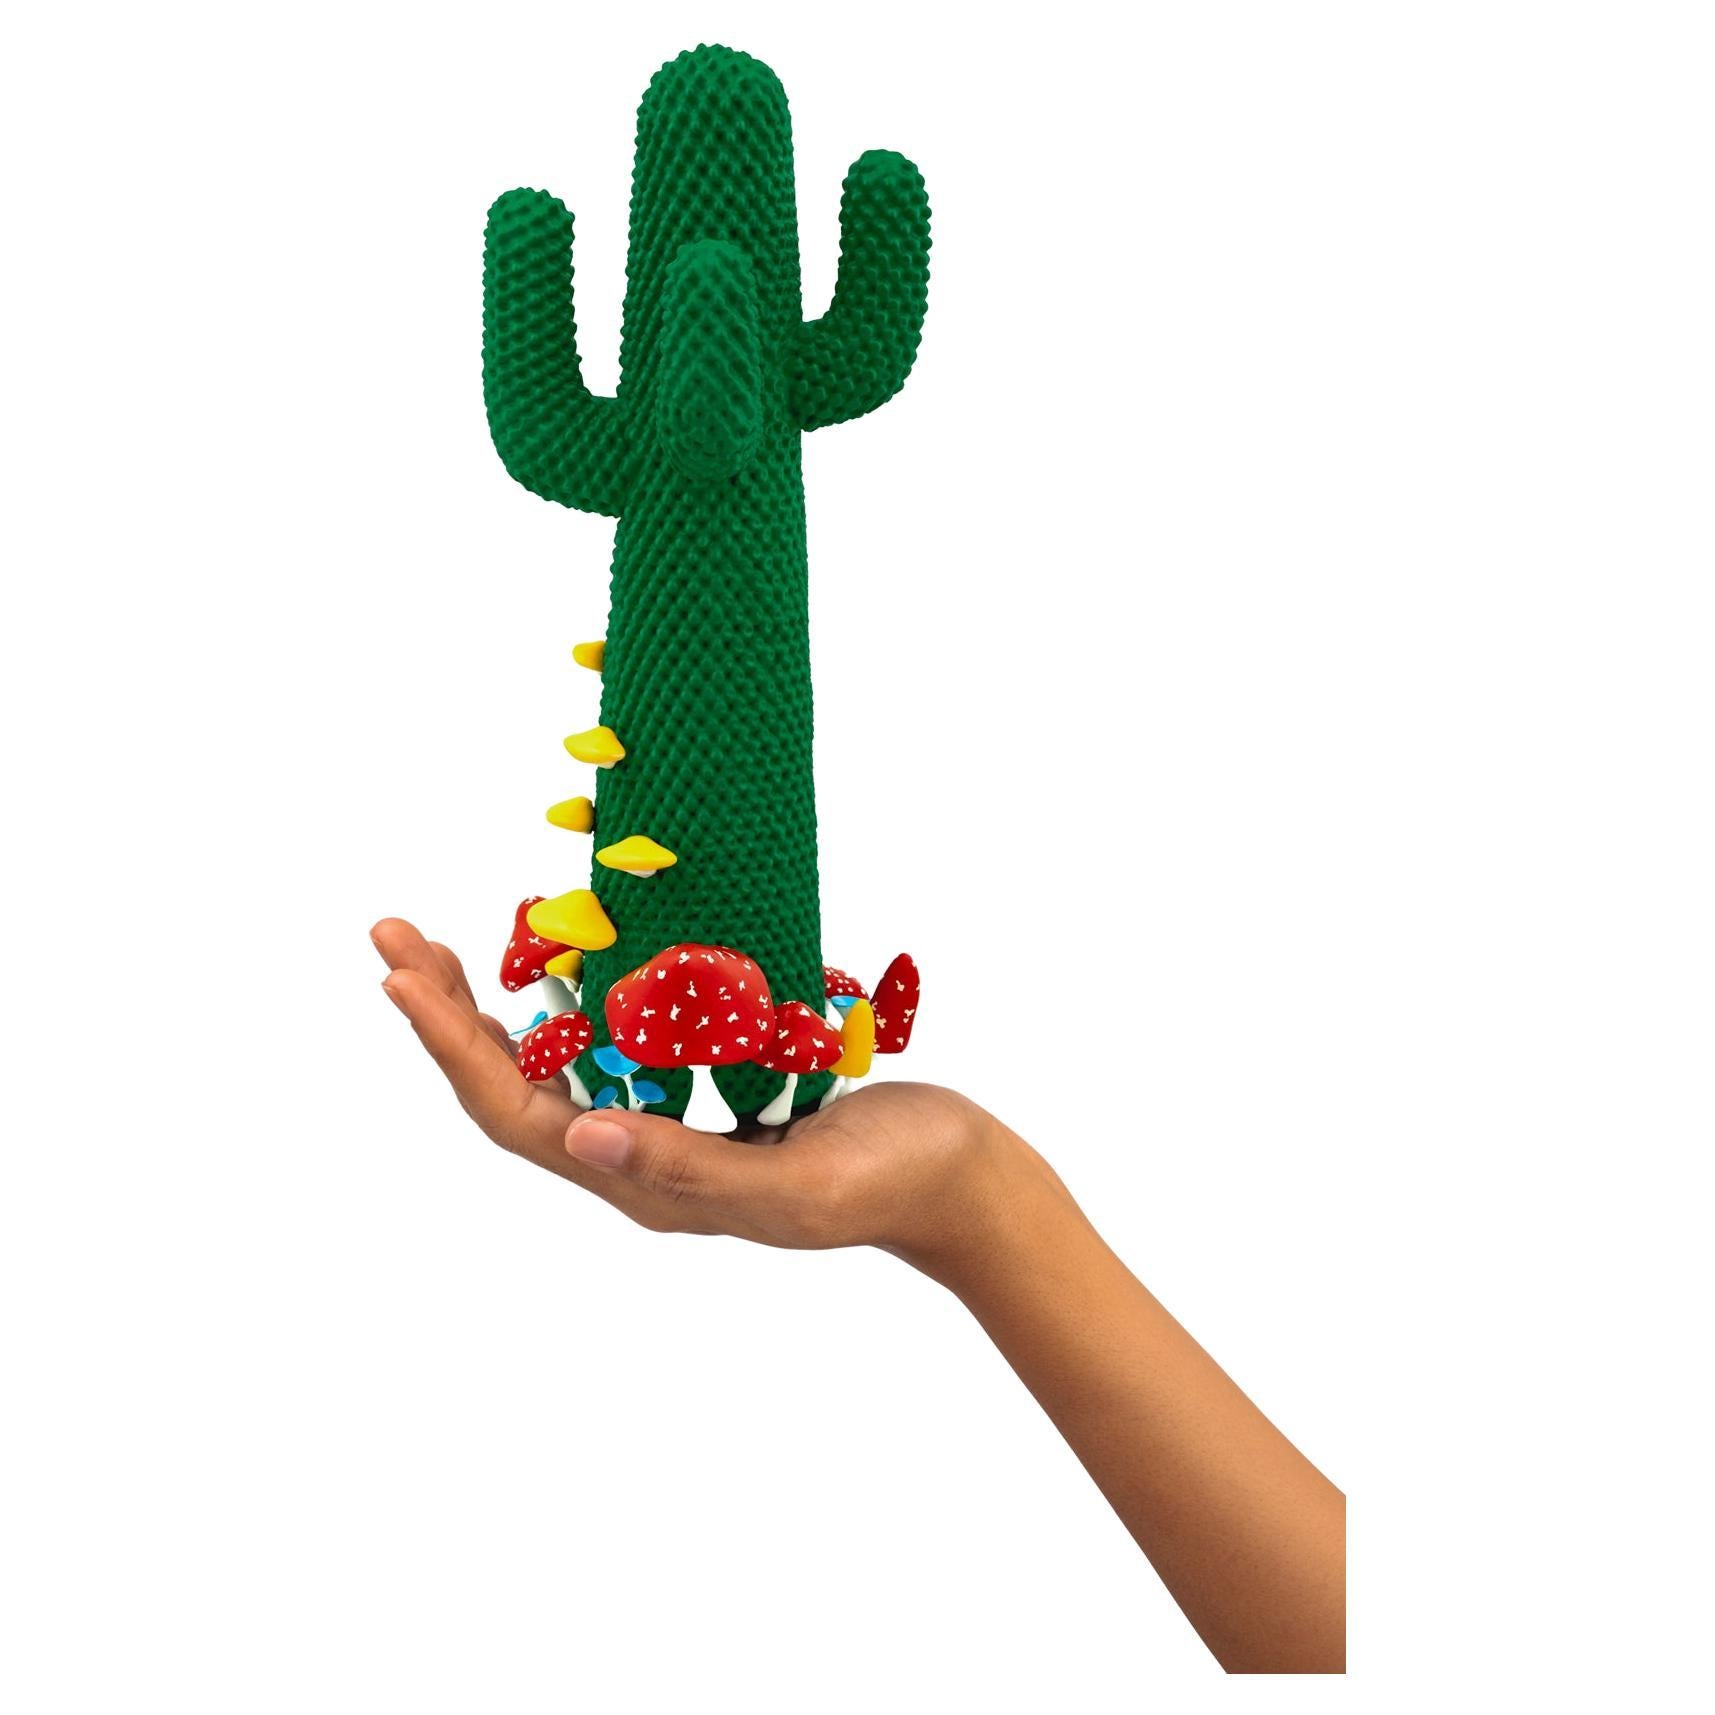 Limited Edition #39/99

Gufram presents the miniaturised version of the Shroom CACTUS® created in collaboration with A$AP Rocky and the artist’s new design studio HOMMEMADE Exactly as the real-size Shroom CACTUS®, the new Guframini piece features